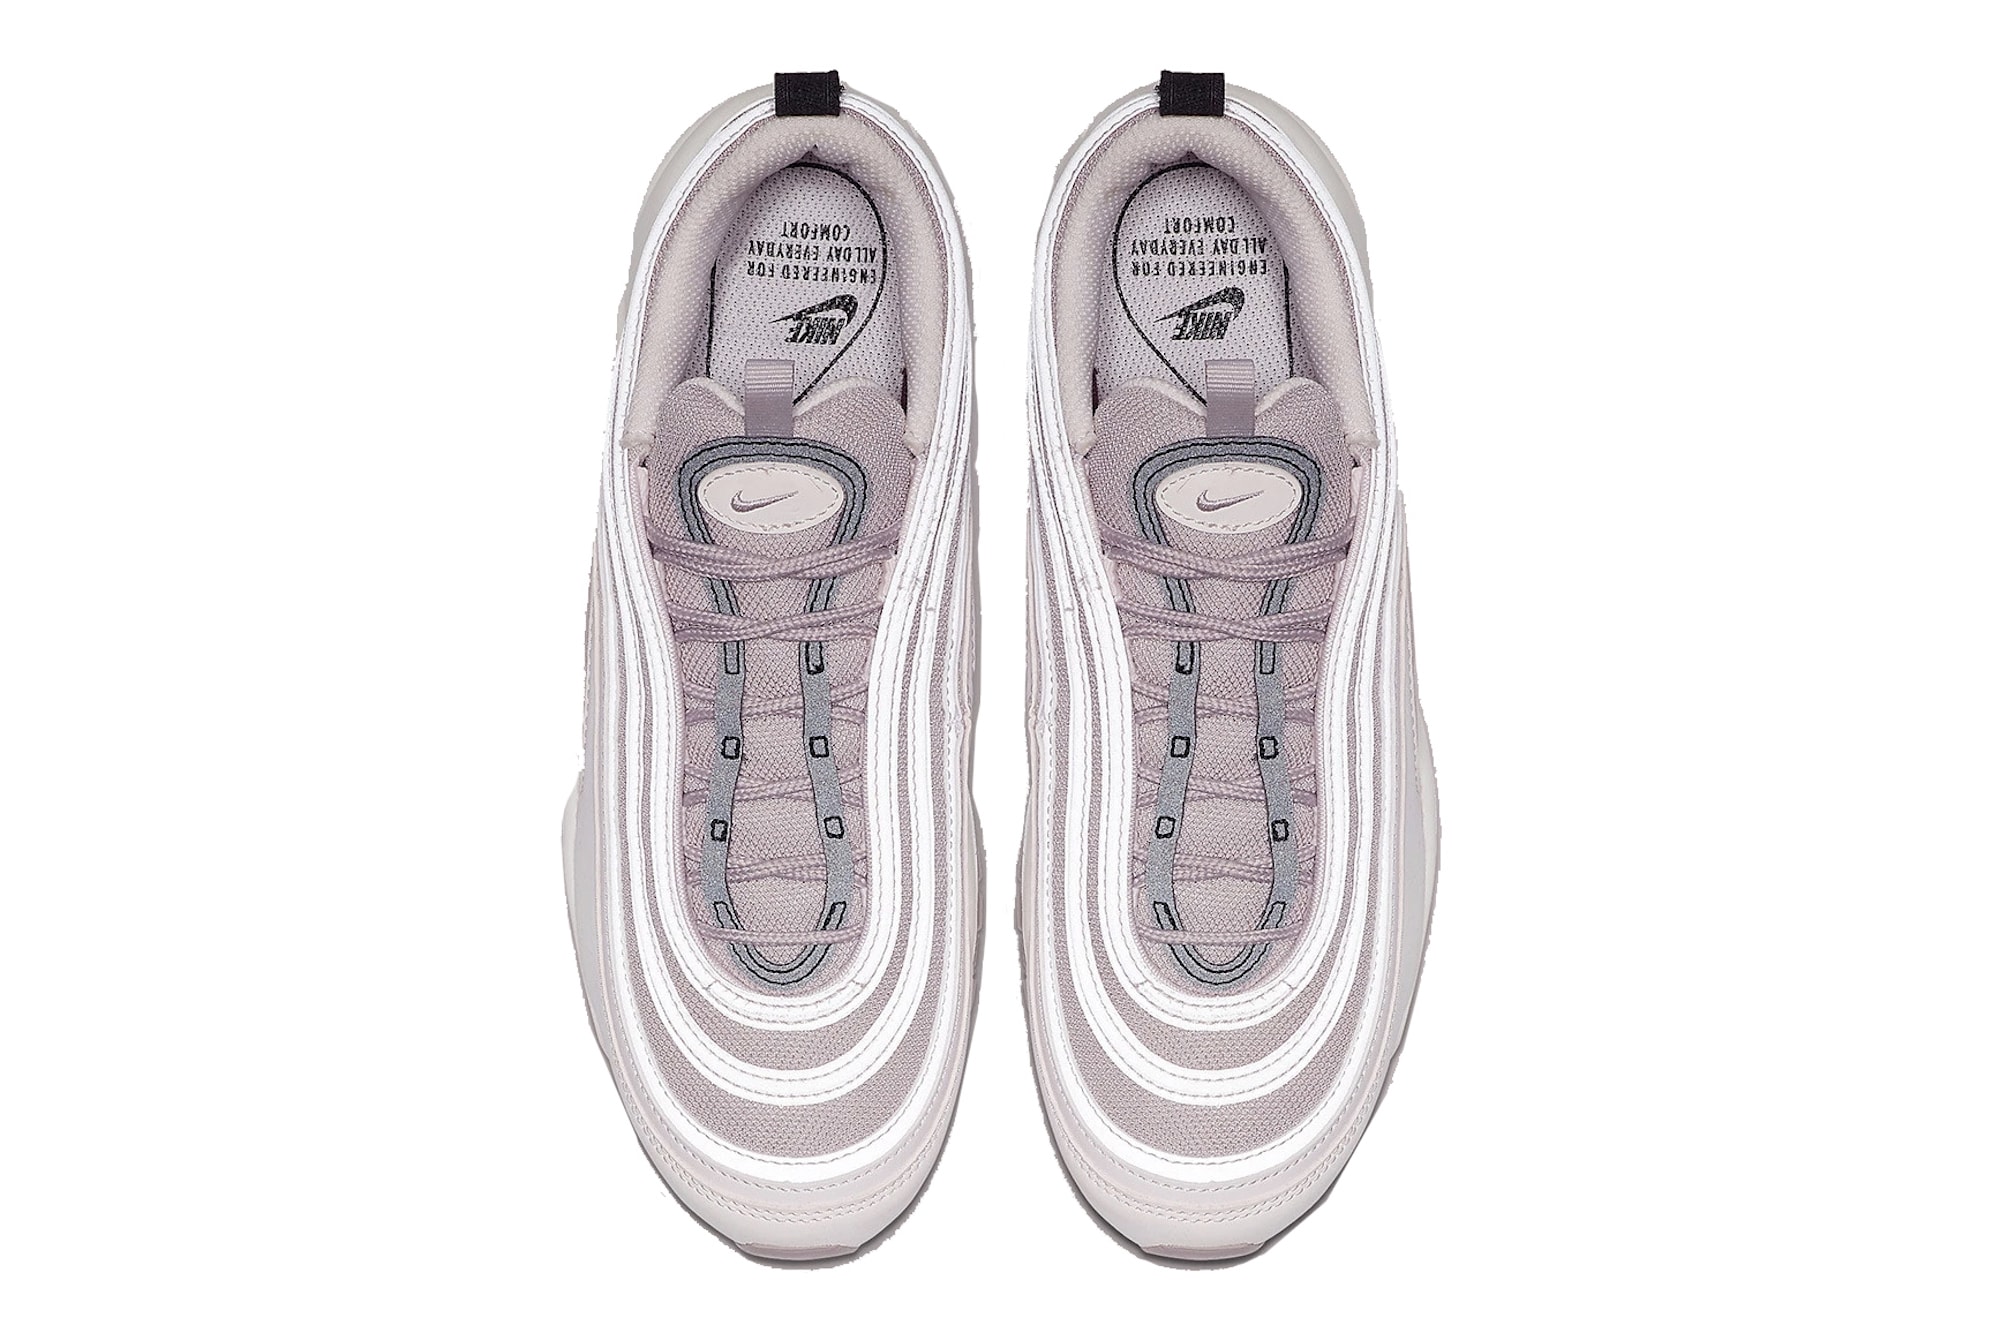 Nike Air Max 97 "Pastel Pink" Spring Release Monochrome Sneaker Shoe Retro Trainer 